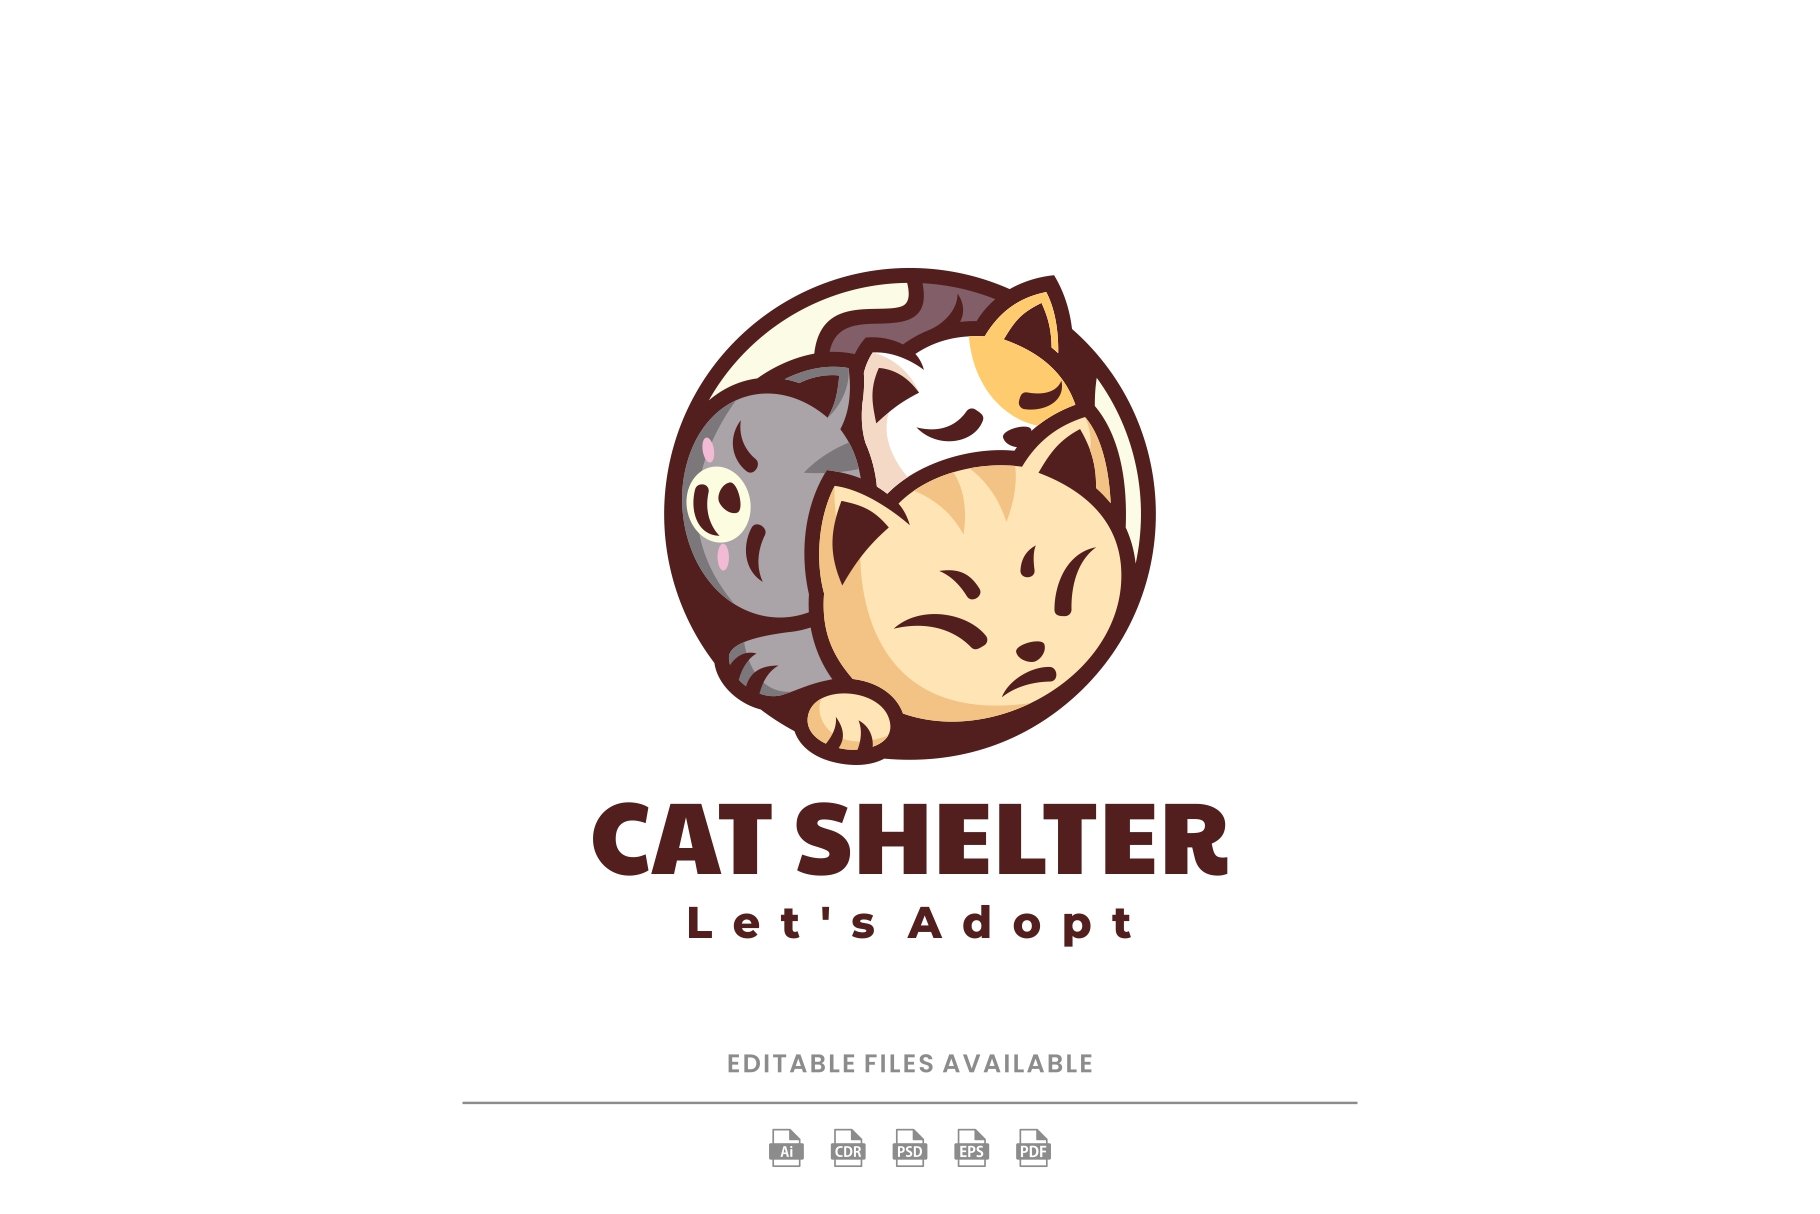 Cat Shelter Simple Mascot Logo cover image.